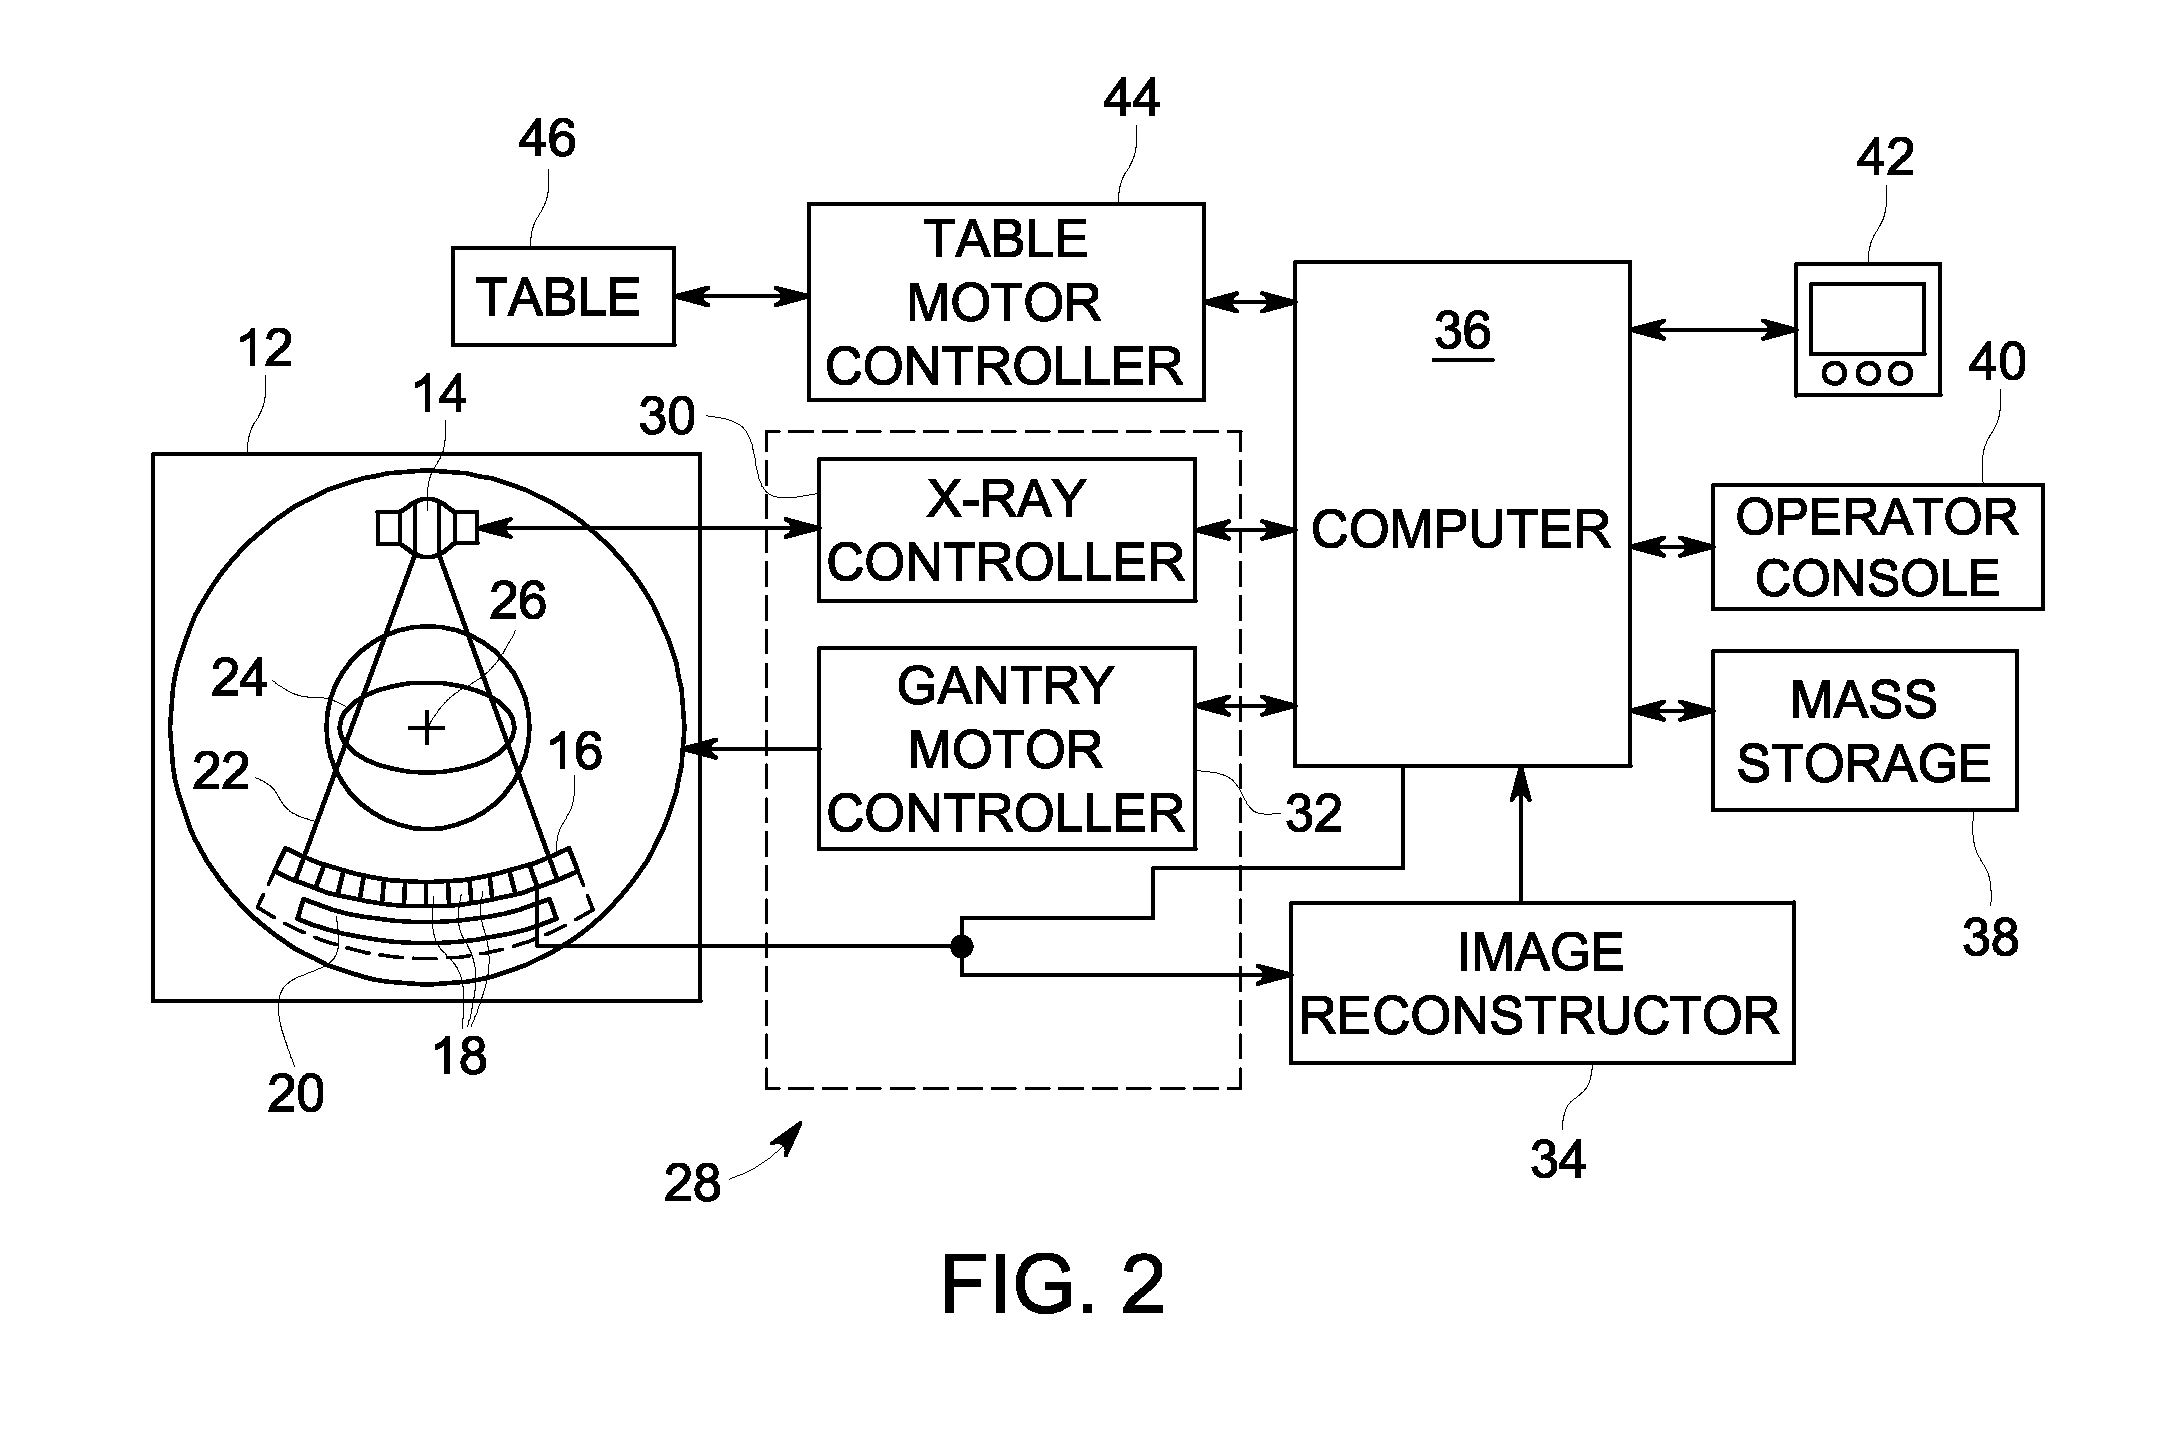 System and method of iterative image reconstruction for computed tomography